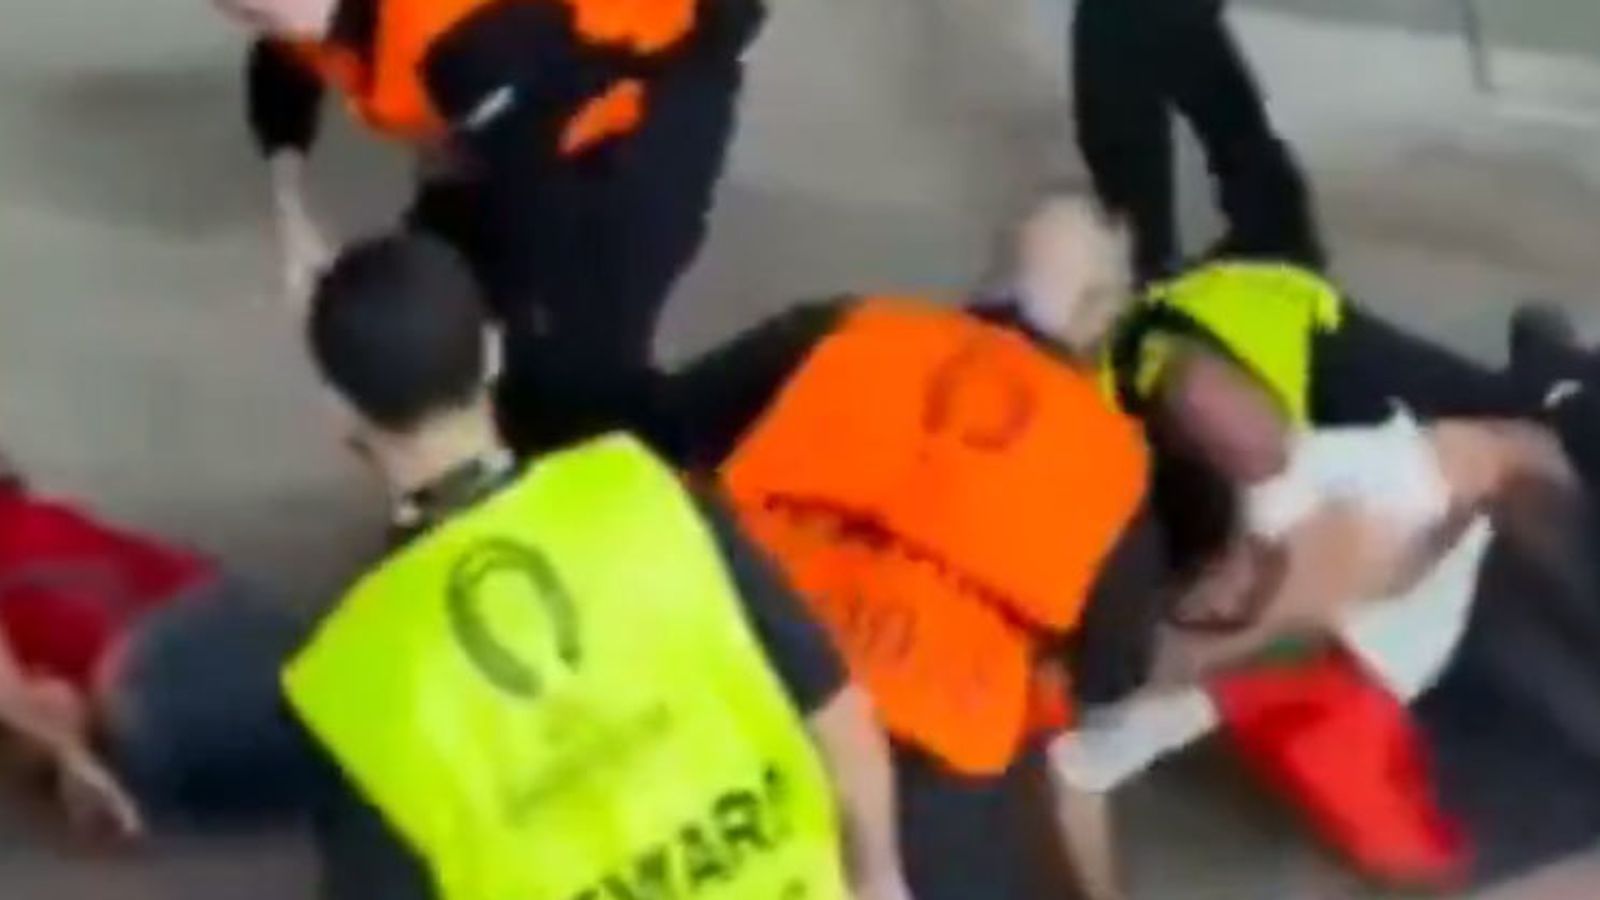 Euro 2024: UEFA say police investigating video showing 'fan' punched and kicked by 'security'